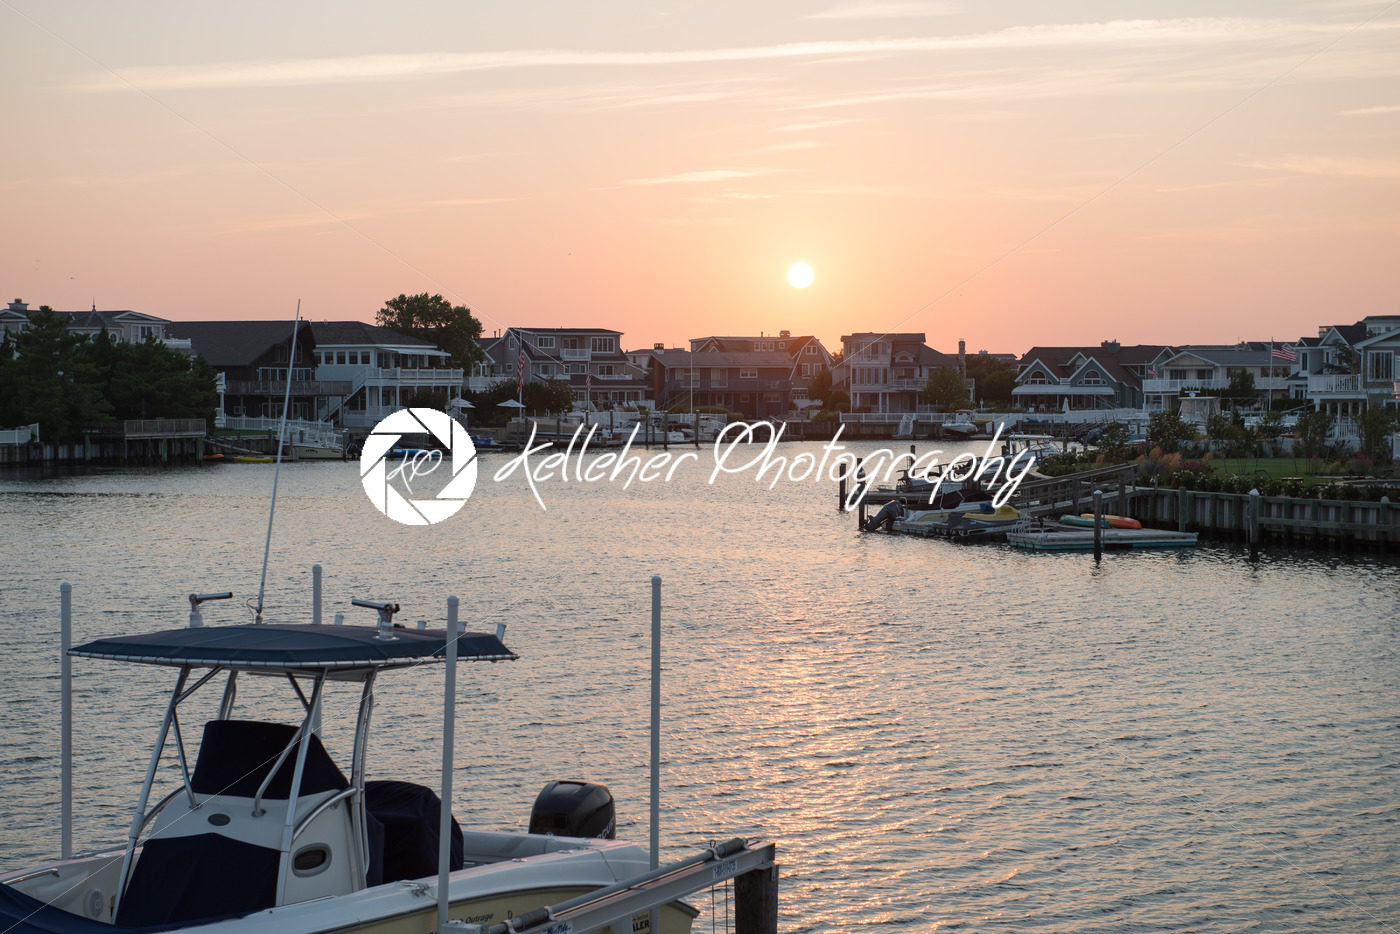 AVALON, NJ – AUGUST 30: Avalon Bay, beautiful bay with view of mansions and yachts at sunset on August 30, 2013 - Kelleher Photography Store